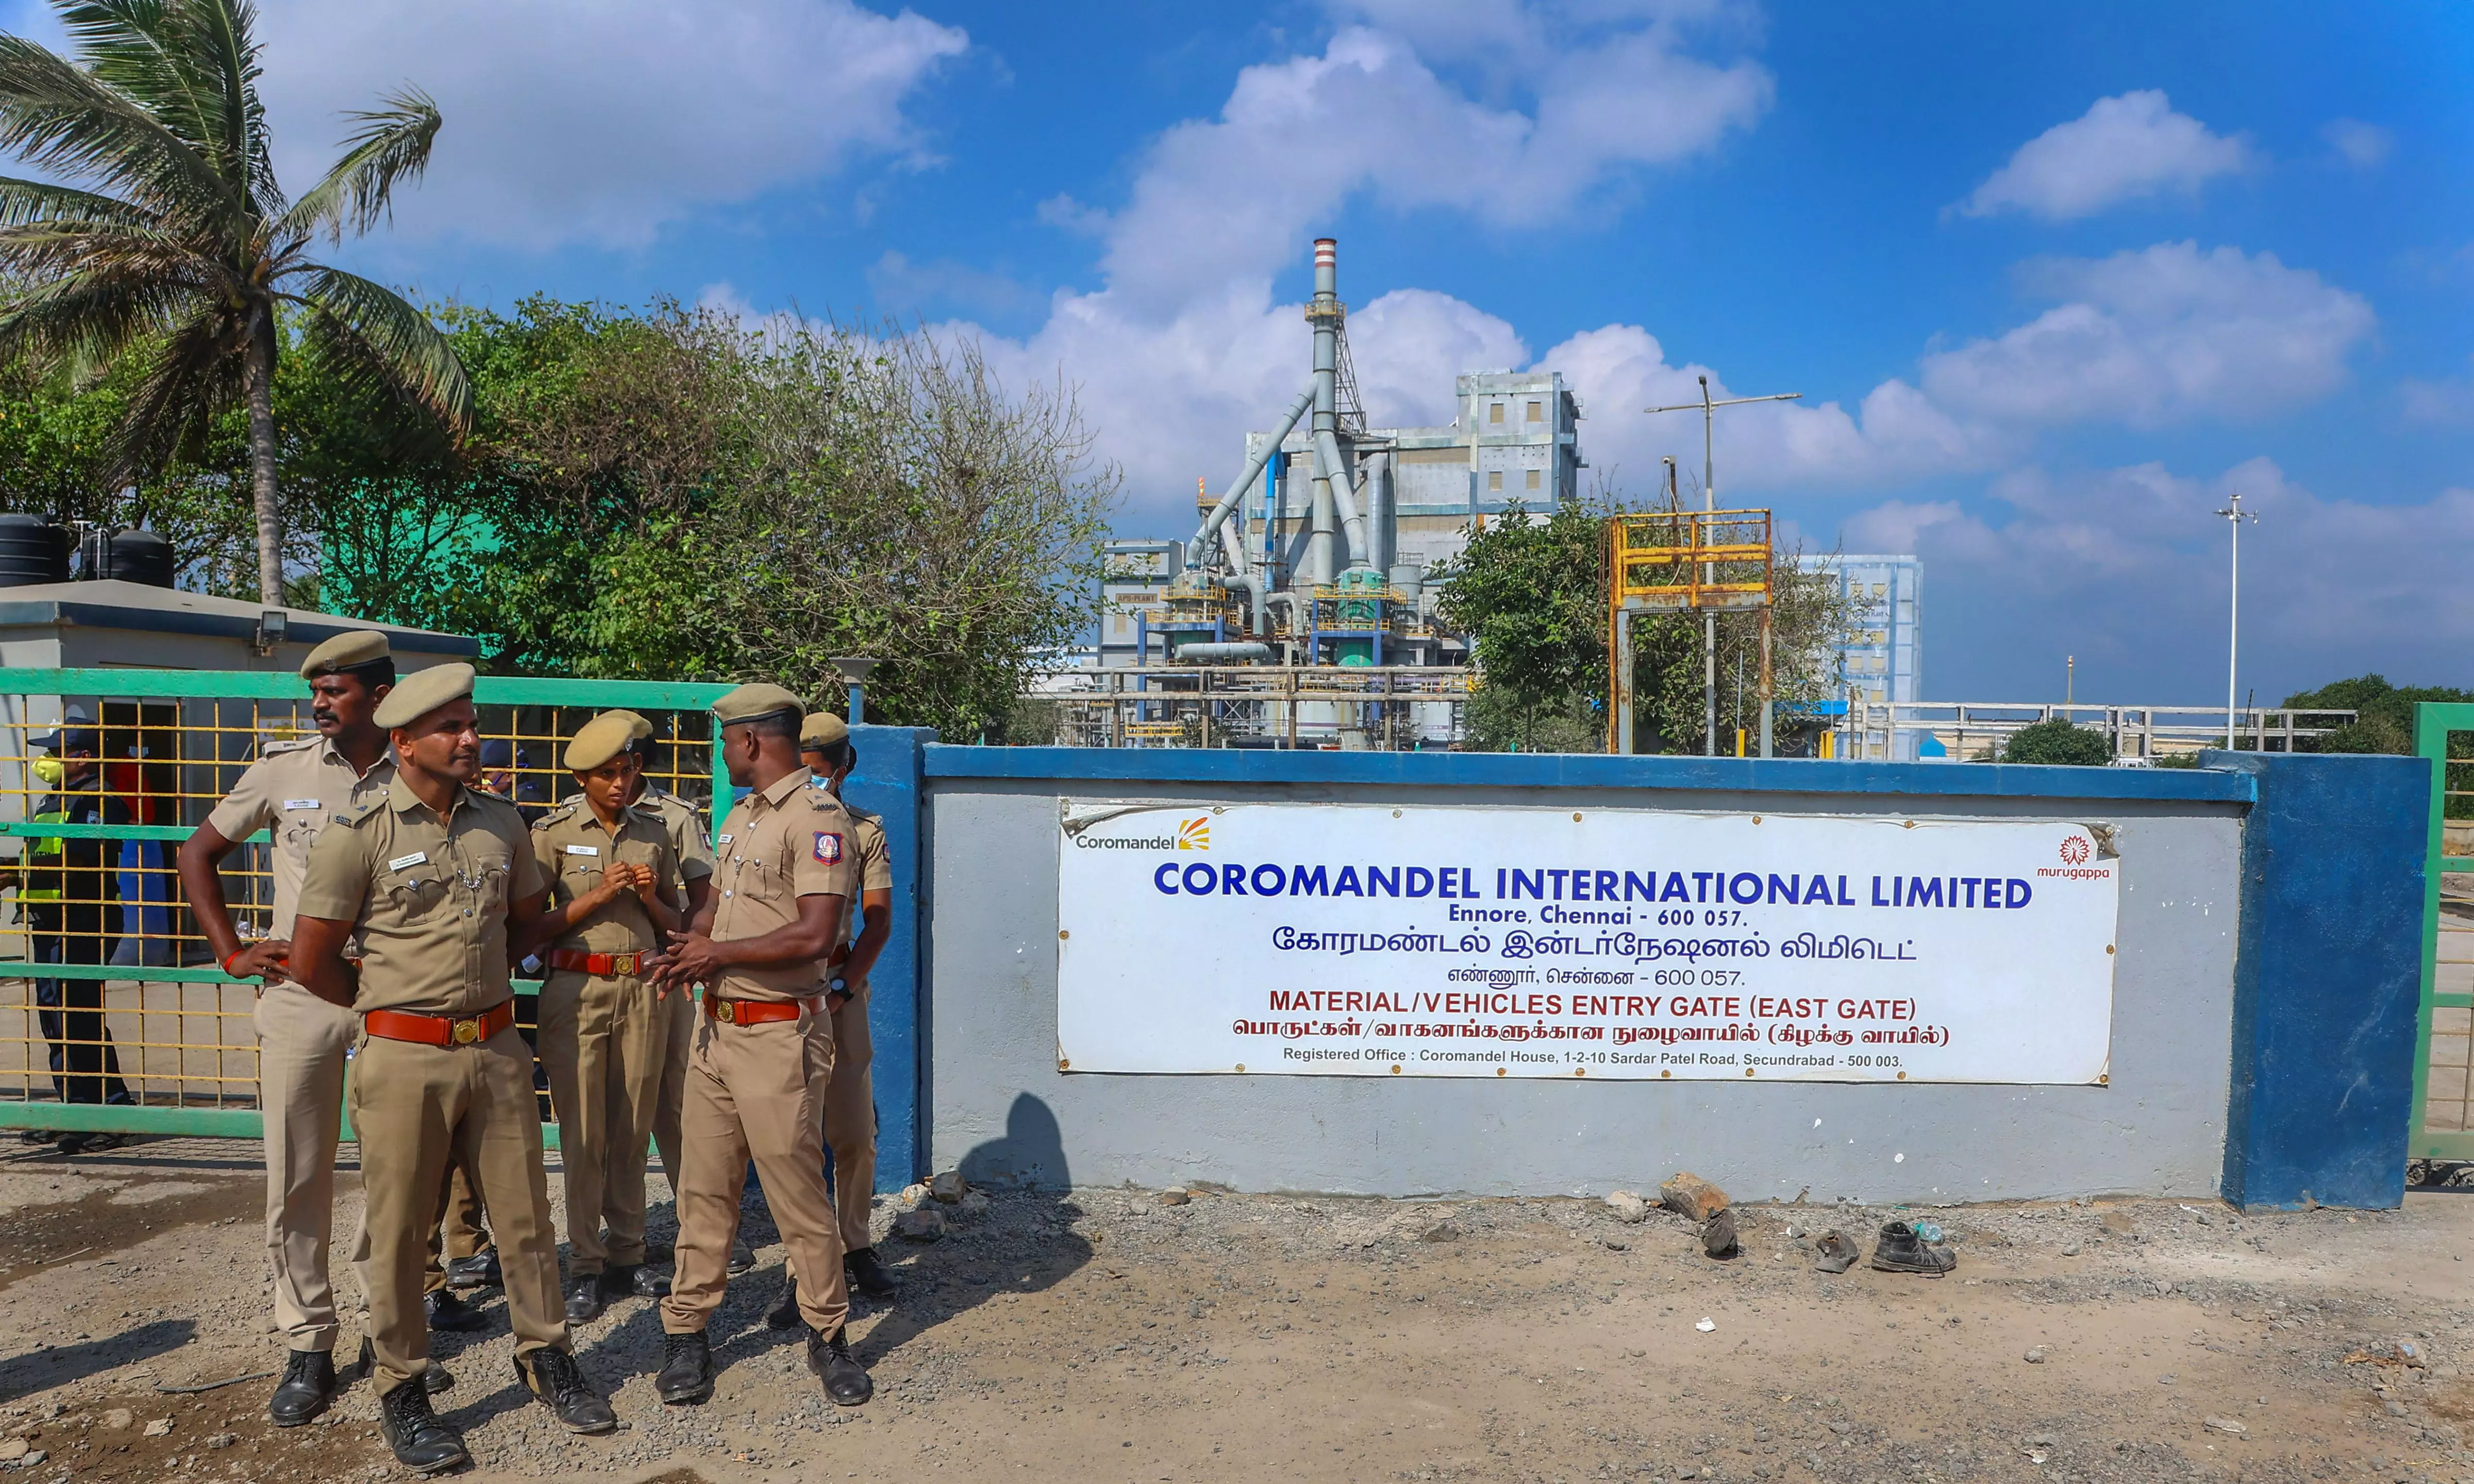 Ennore facilitys ammonia safety systems are robust, says Coromandel International